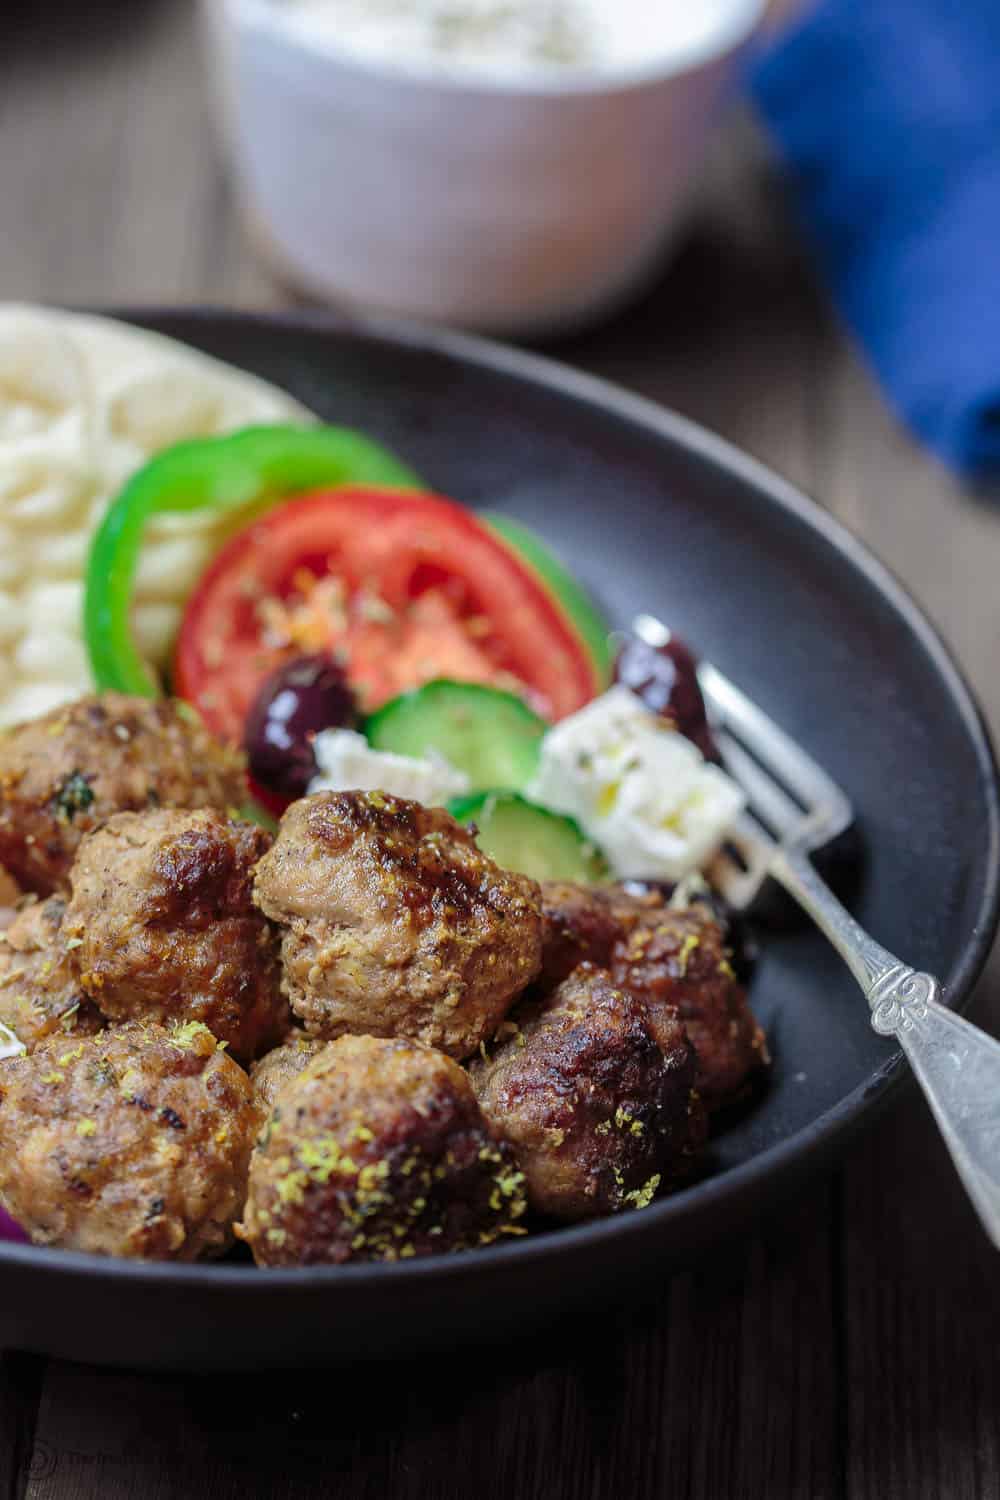 Keftedes Greek Meatballs Recipe | The Mediterranean Dish. Best Greek meatballs ever! Spiced with fresh mint, oregano and more, pan-fried in olive oil then finished with a thick lemony sauce. Serve it with pita and Greek salad and you've got an amazing Greek dinner! See the easy recipe on TheMediterraneanDish.com #greekmeatballs #meatballs #meatballrecipe #greekfood #greekrecipe 